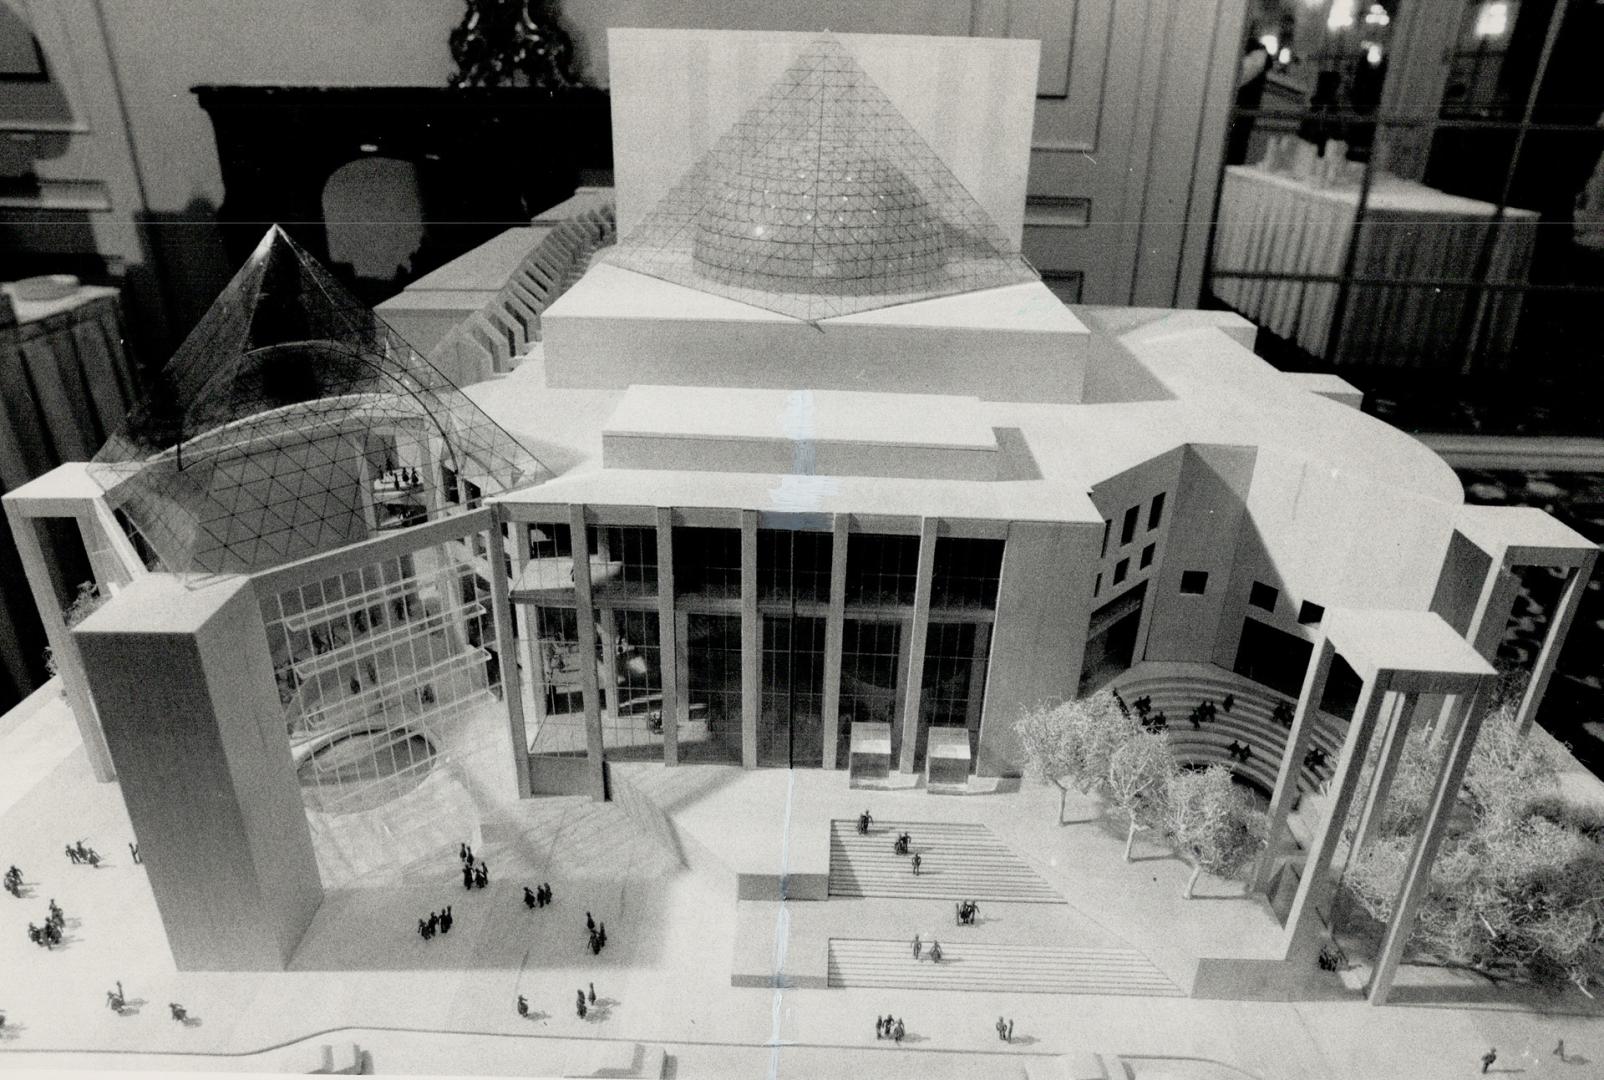 The house Safdie would build. Art critic Christopher Hume has reservations about Moshe Safdie's design for Toronto's proposed Ballet Opera House. Hume(...)